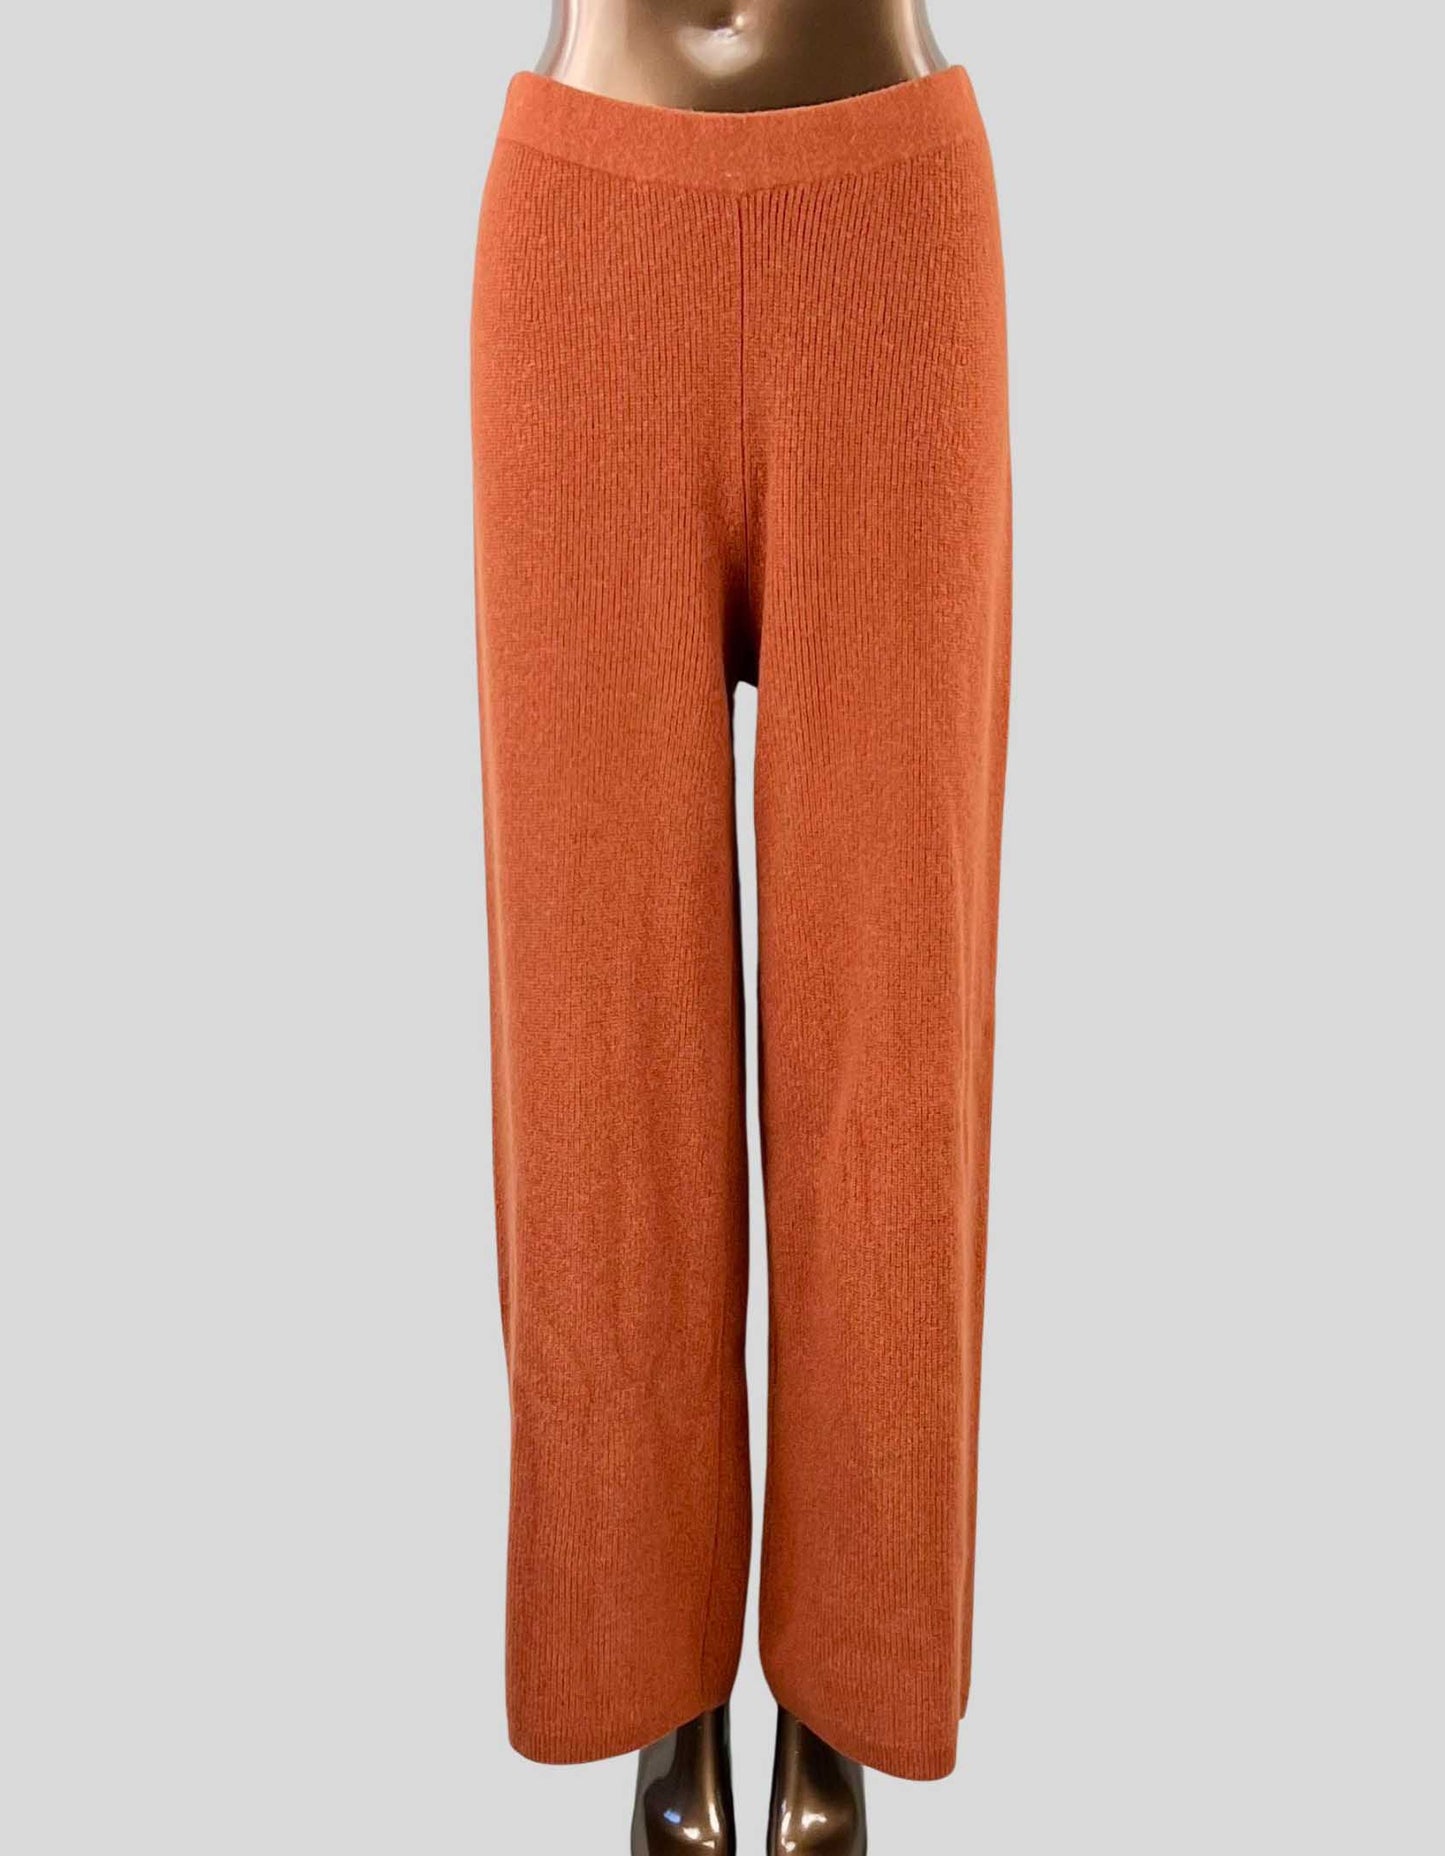 CULT GAIA Cashmere Knit Pull-On Ankle High Waist Pants - Medium